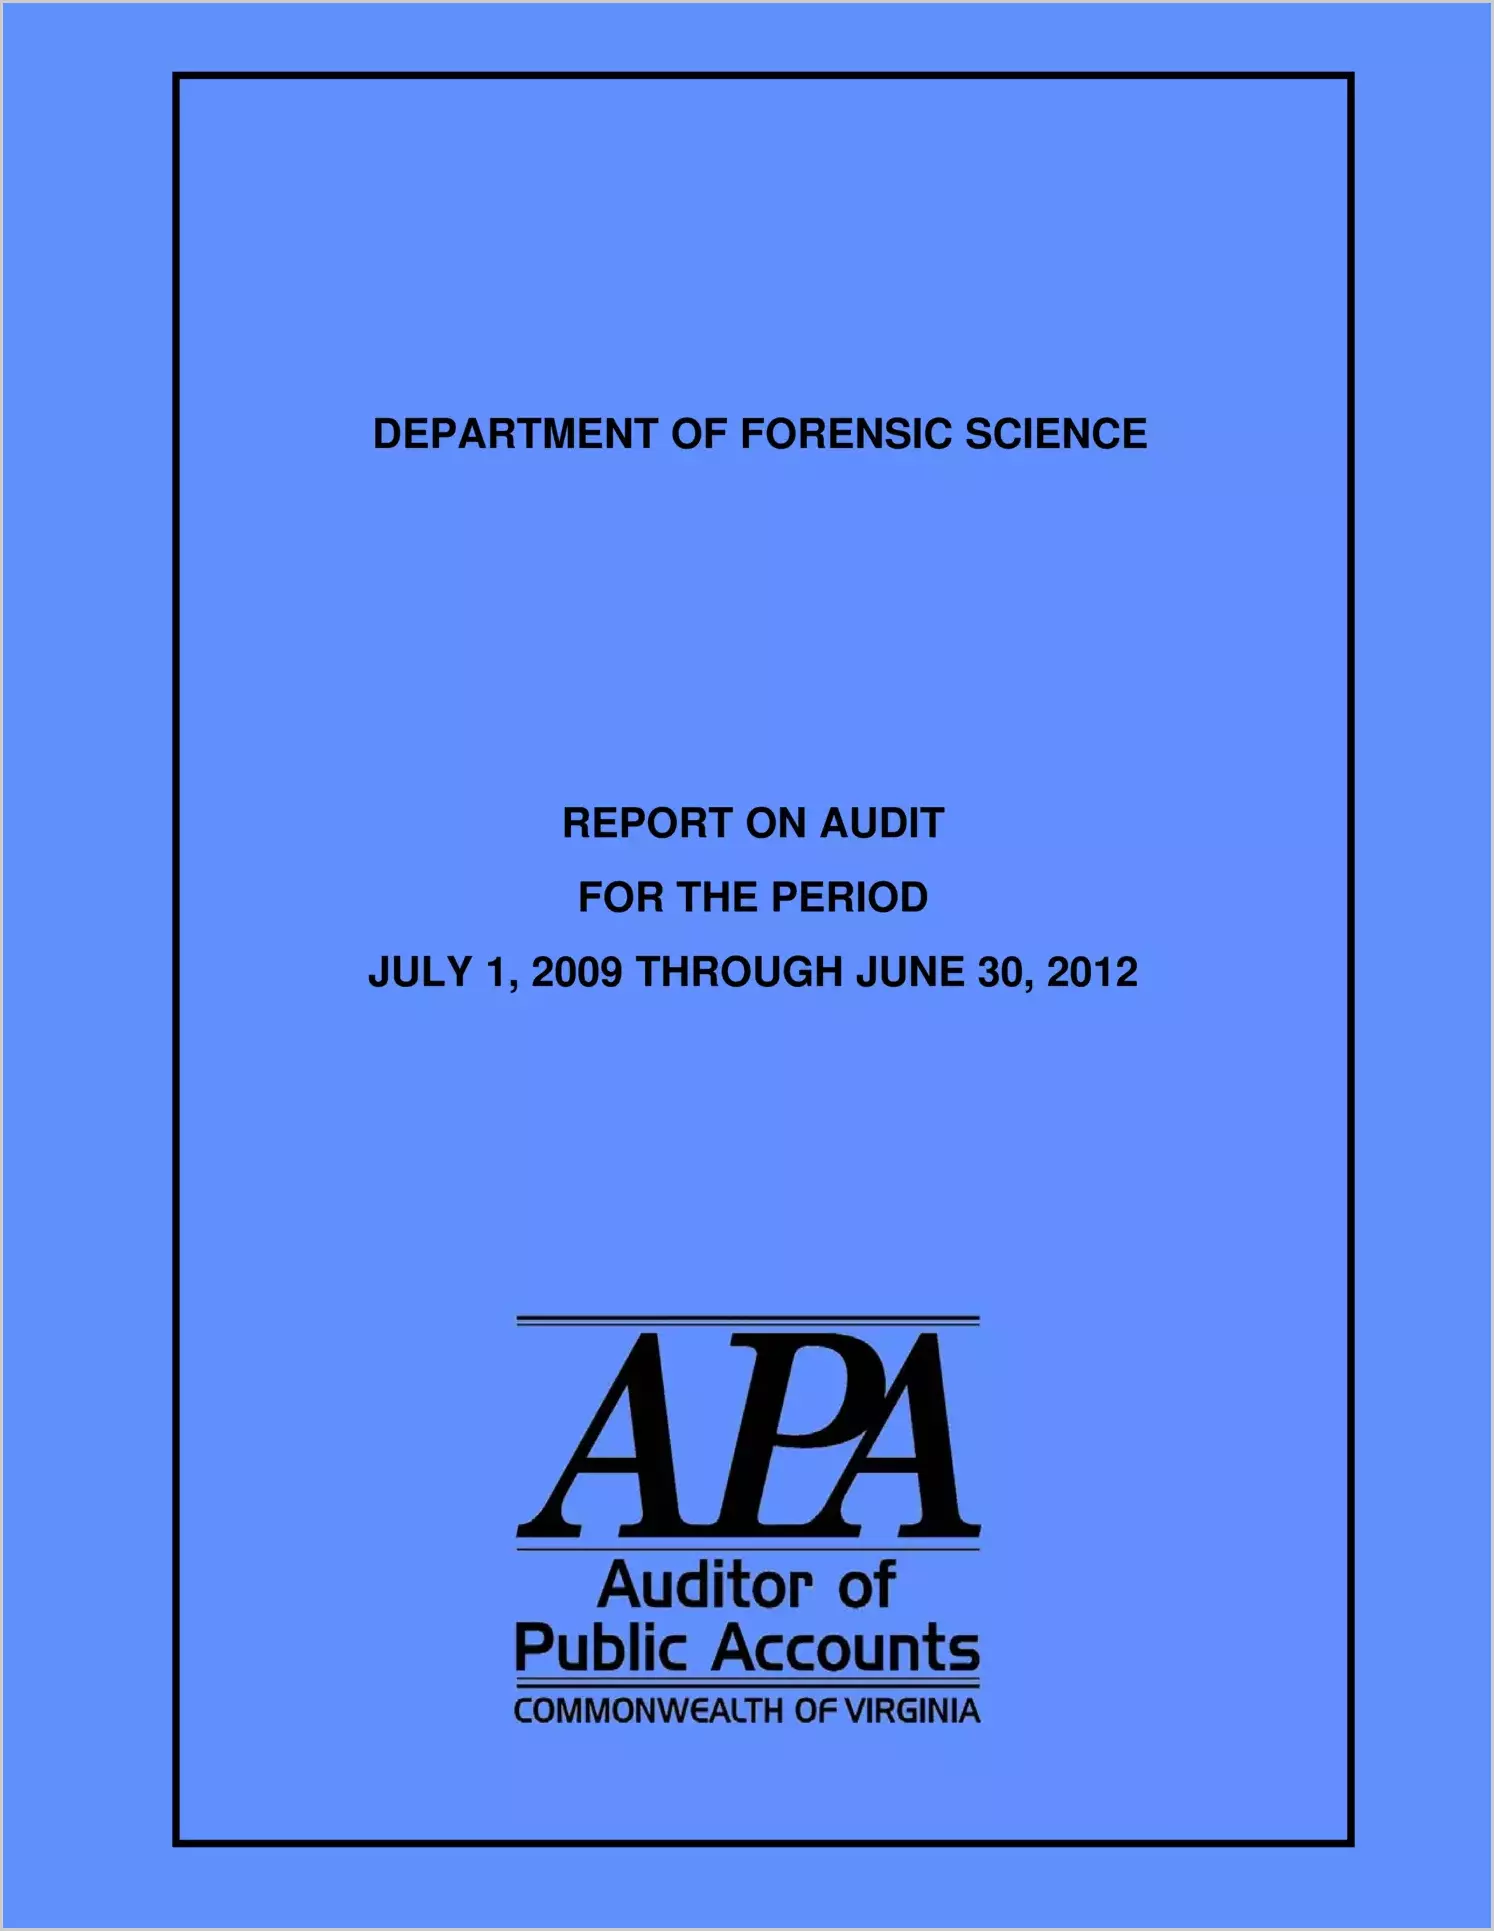 Department of Forensic Science Report on Audit for the Period July 1, 2009 through June 30, 2012